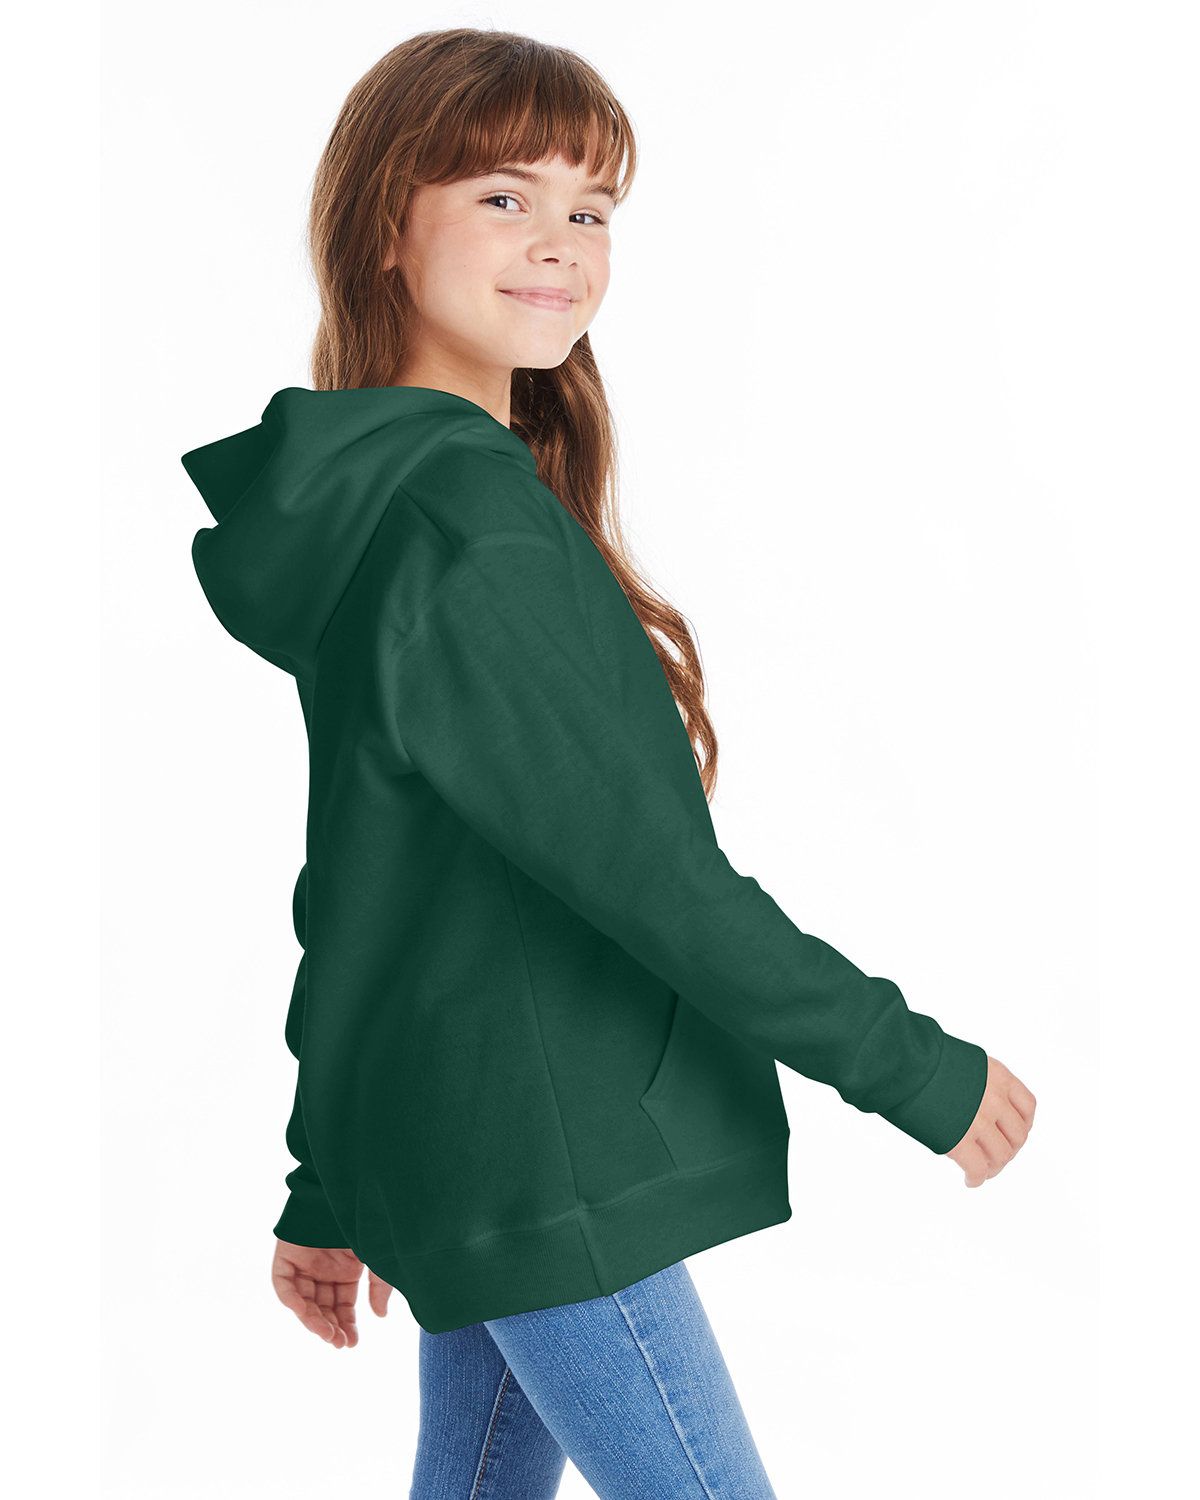 'Hanes P473 ComfortBlend Youth Pullover Hooded Sweatshirt'